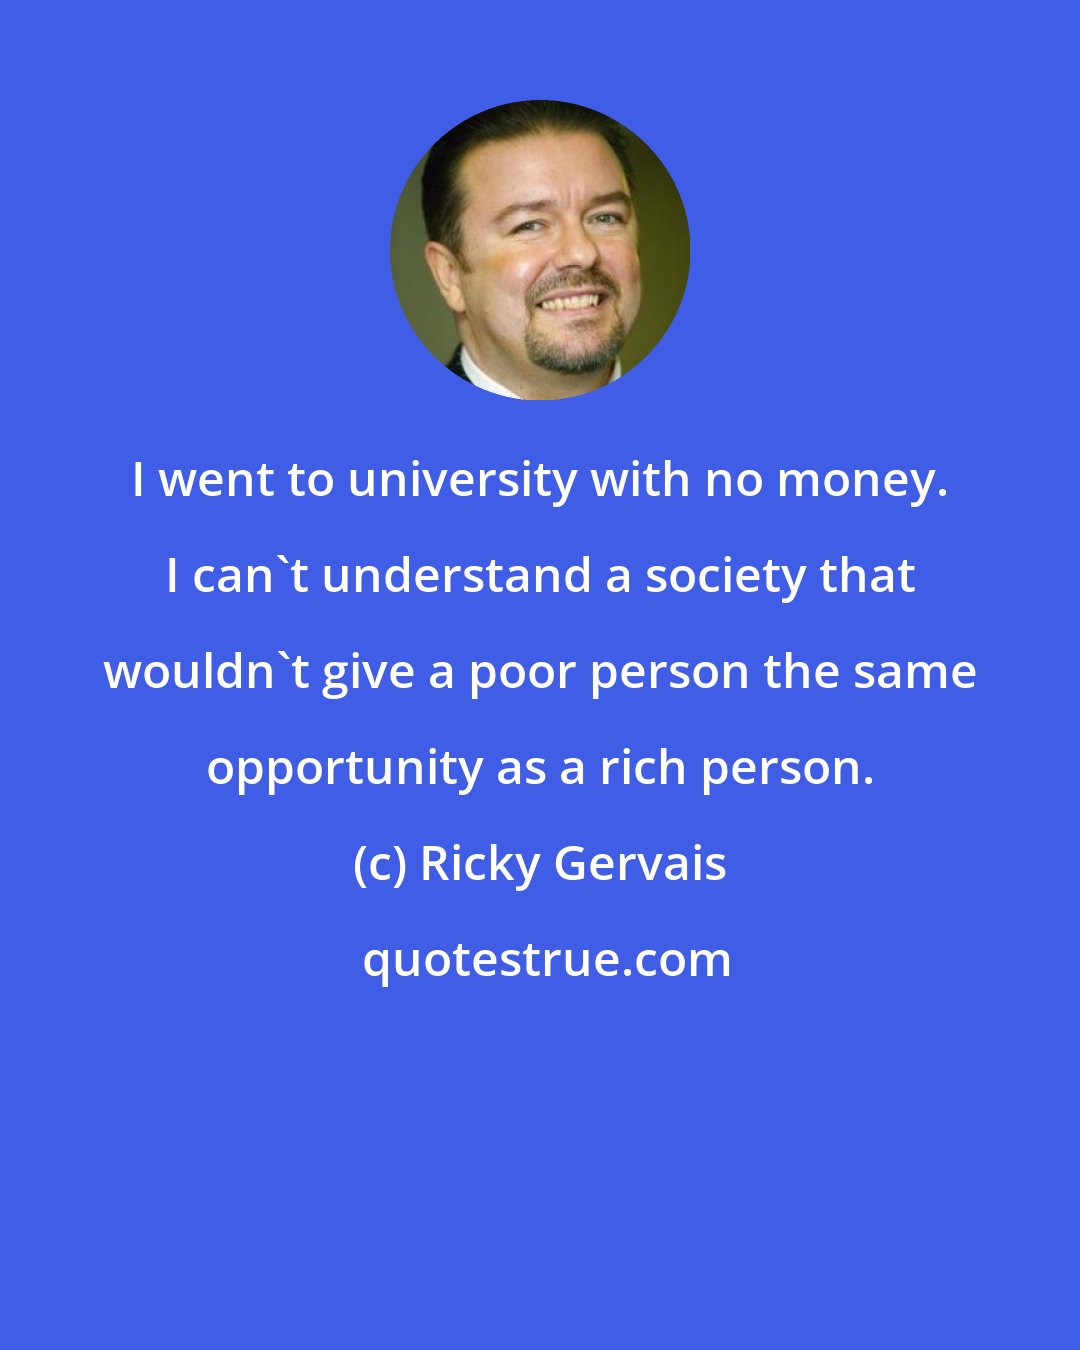 Ricky Gervais: I went to university with no money. I can't understand a society that wouldn't give a poor person the same opportunity as a rich person.